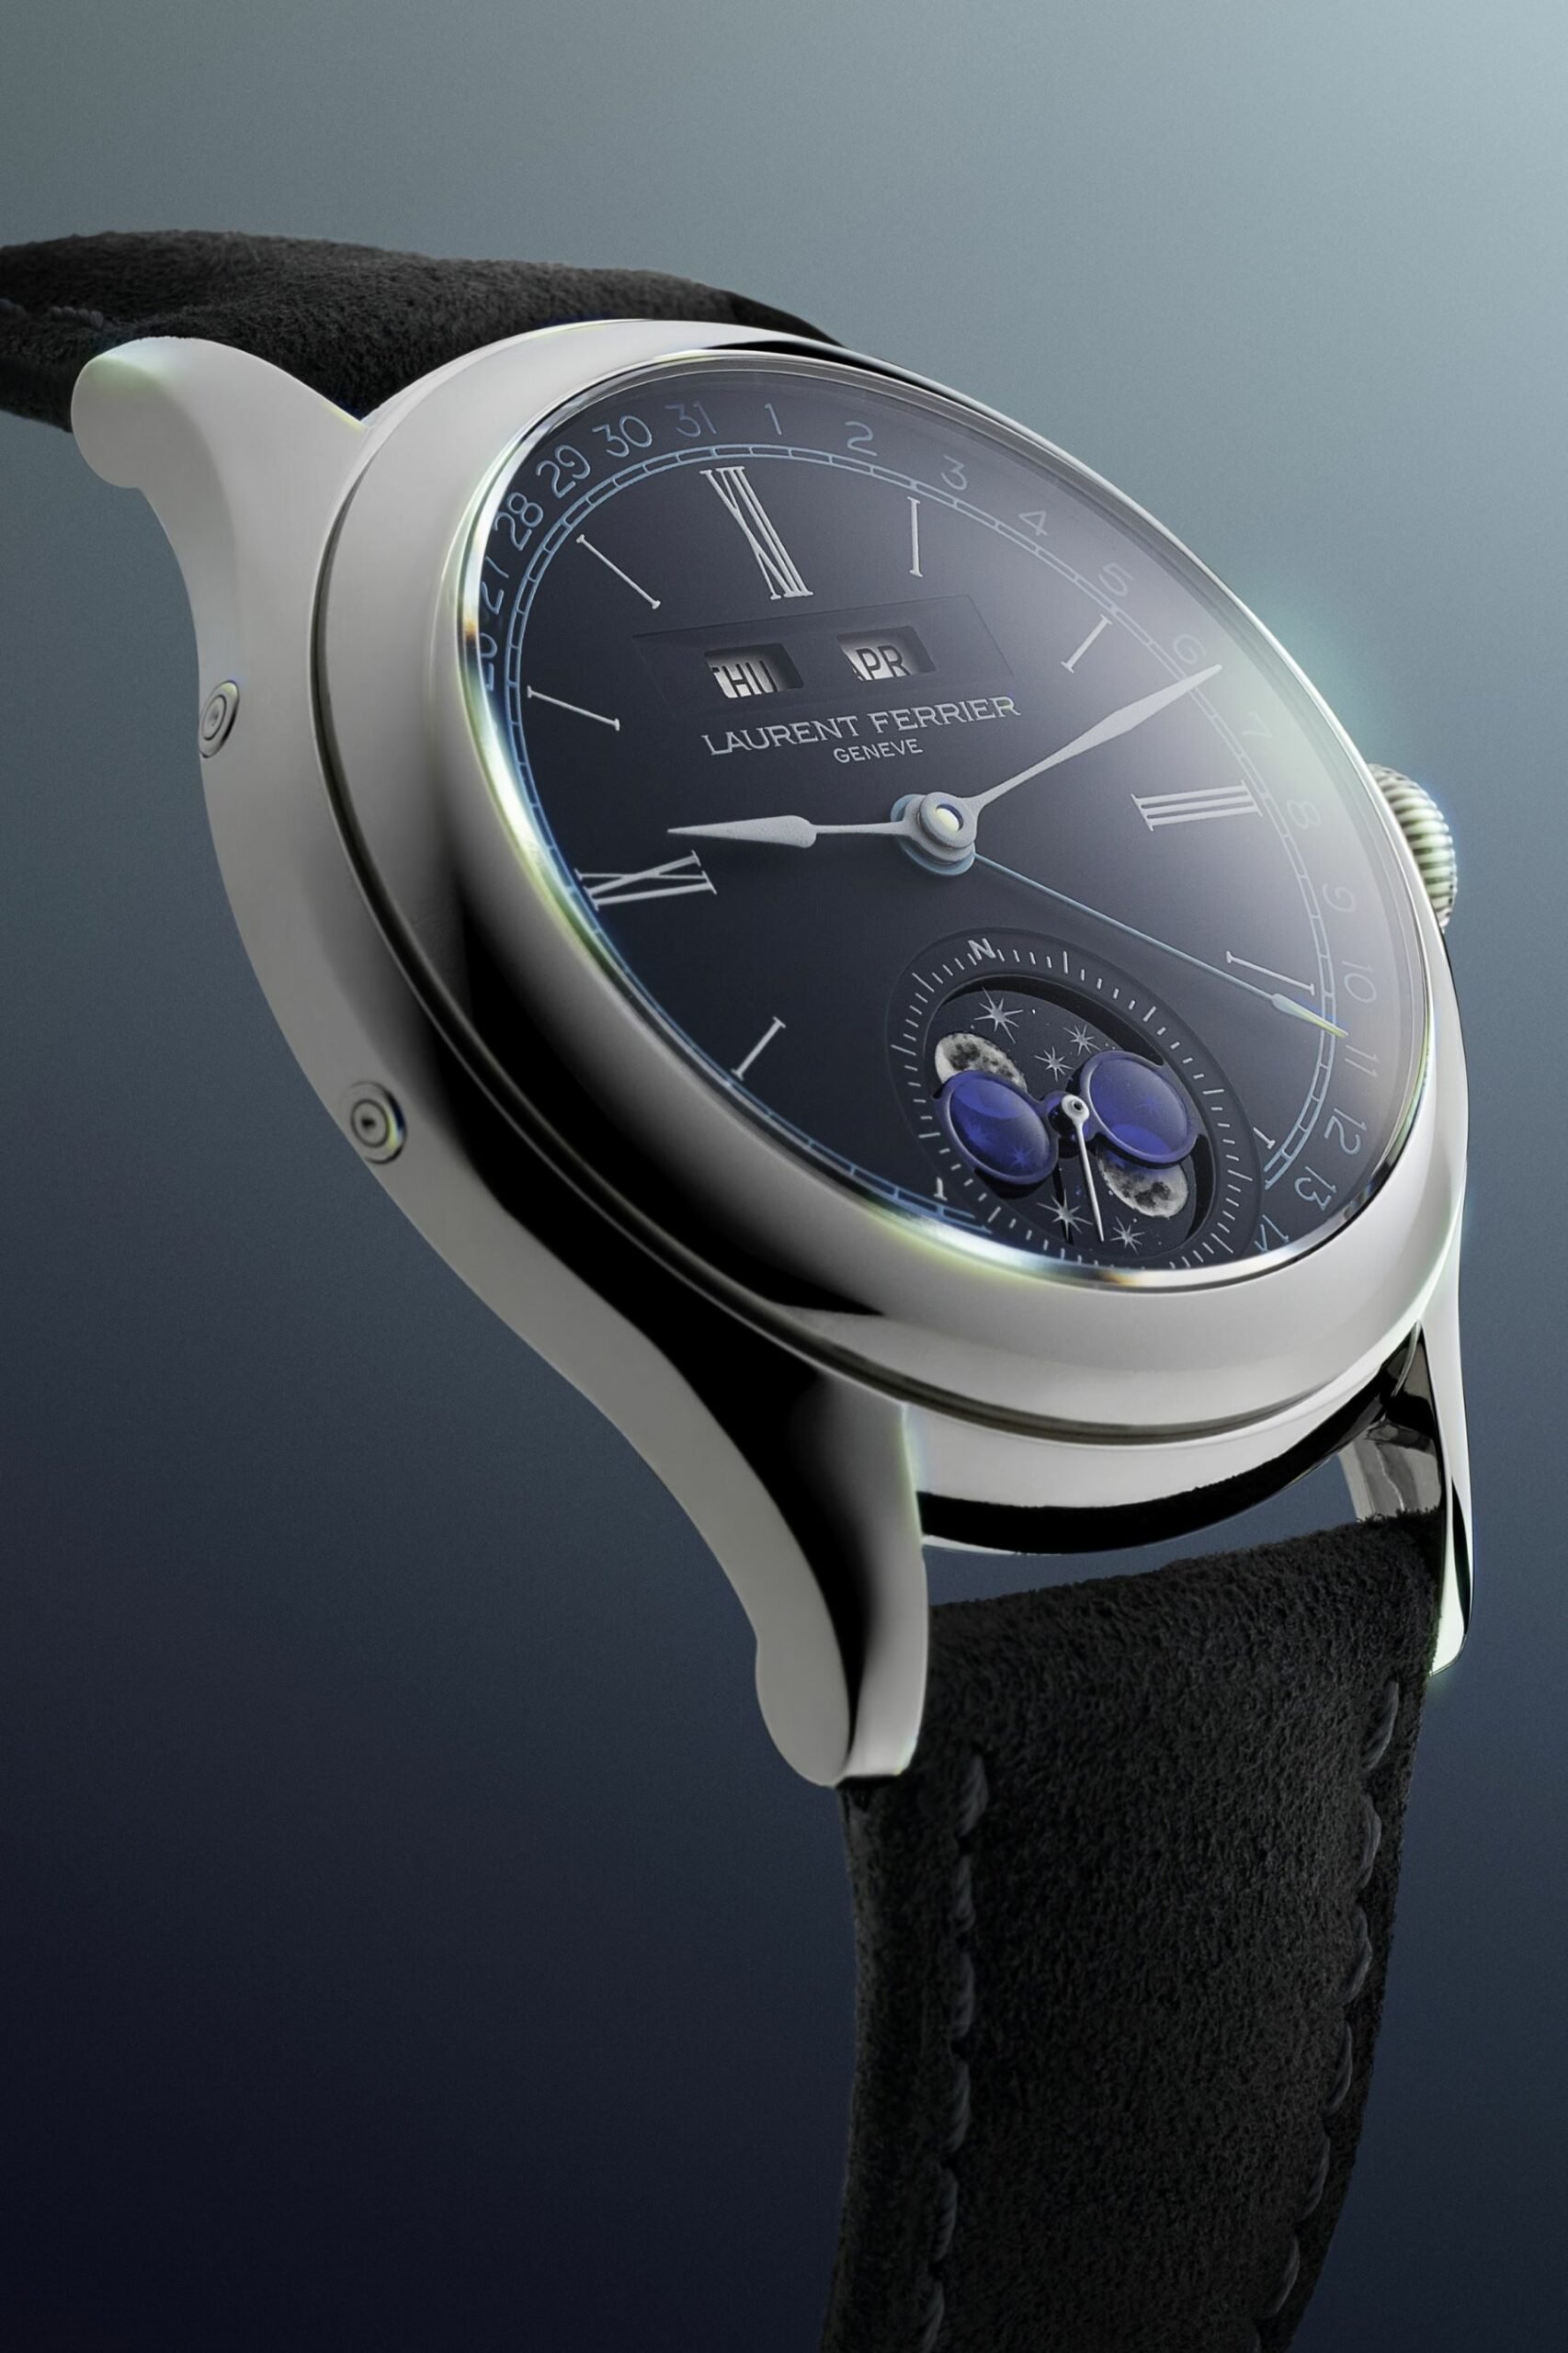 Introducing the Laurent Ferrier Classic Moon Phase